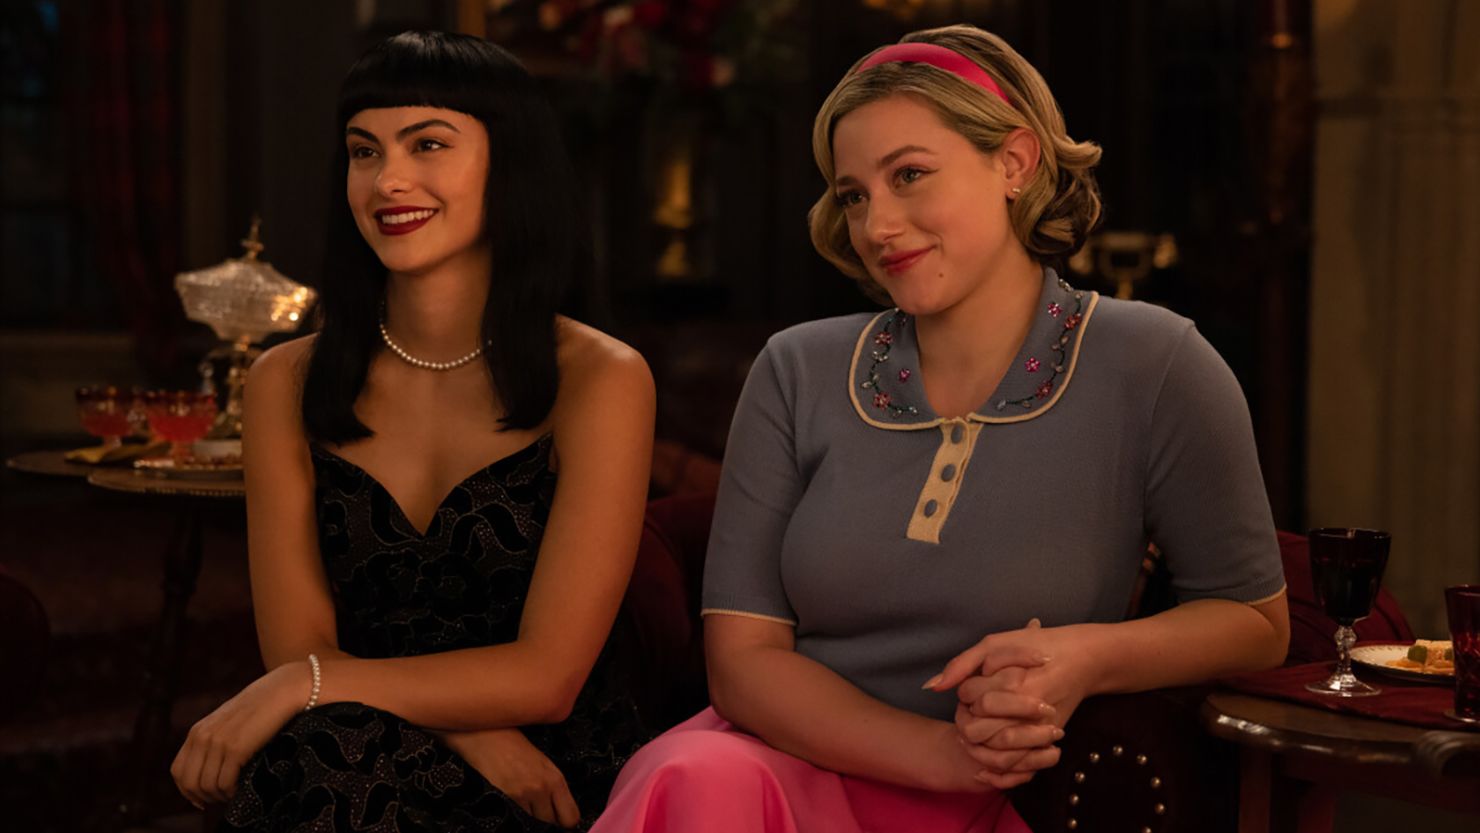 Camila Mendes as Veronica Lodge and Lili Reinhart as Betty Cooper. 